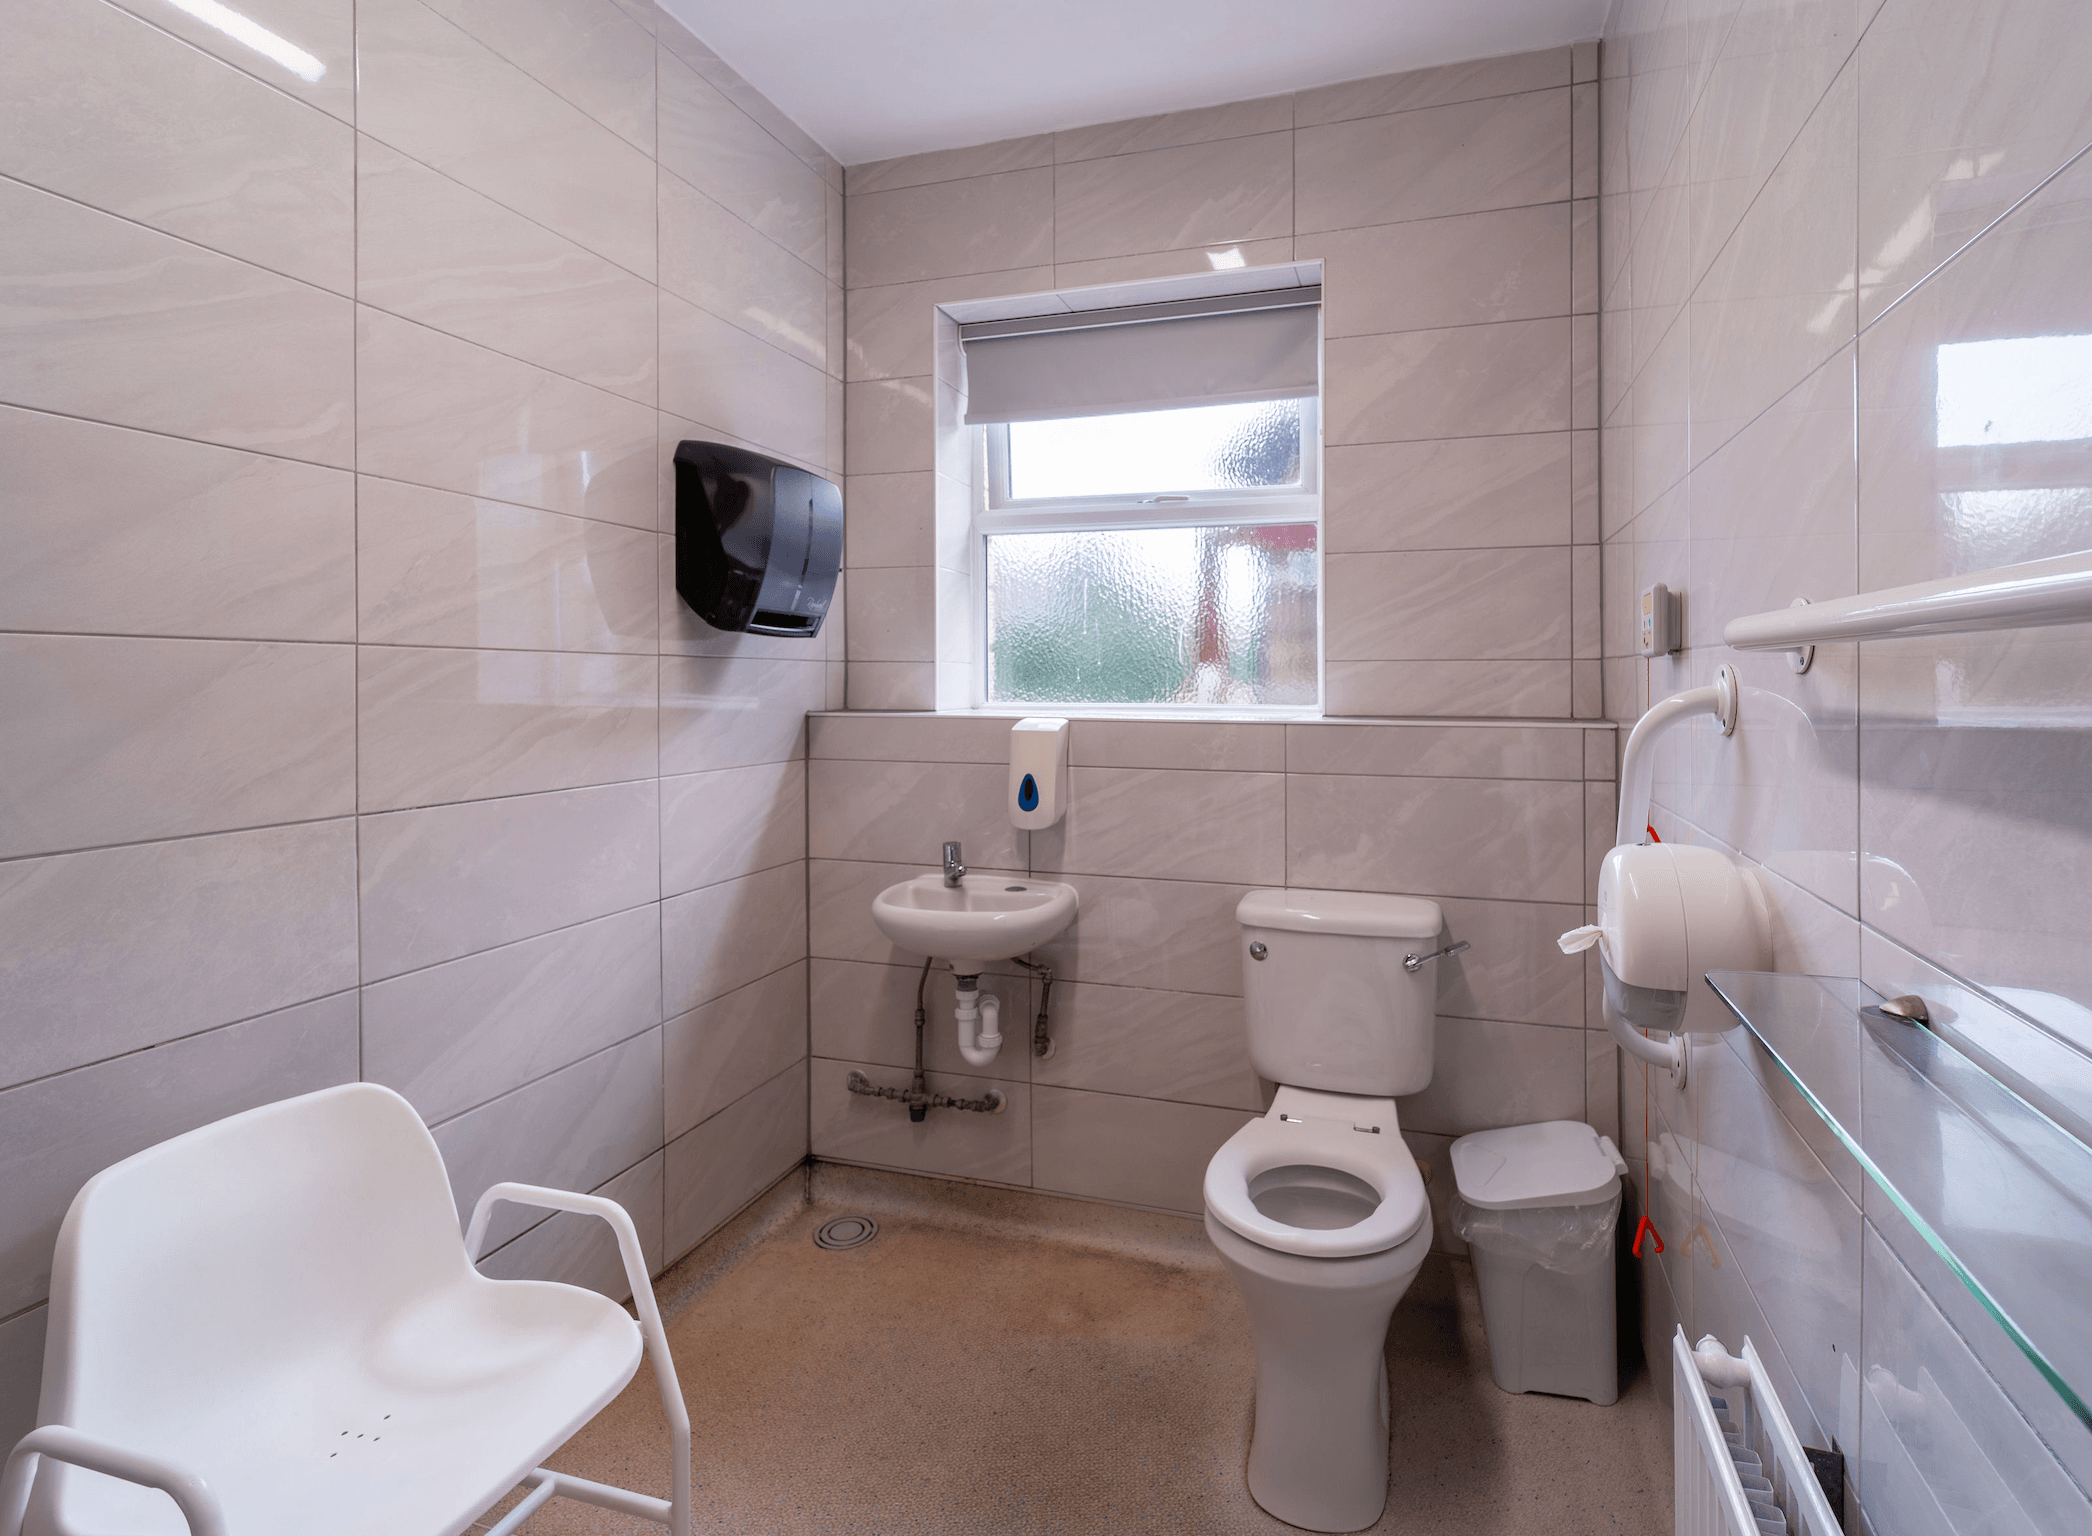 Bathroom at The Avenue Care Home in Malvern-Hills, Worcester